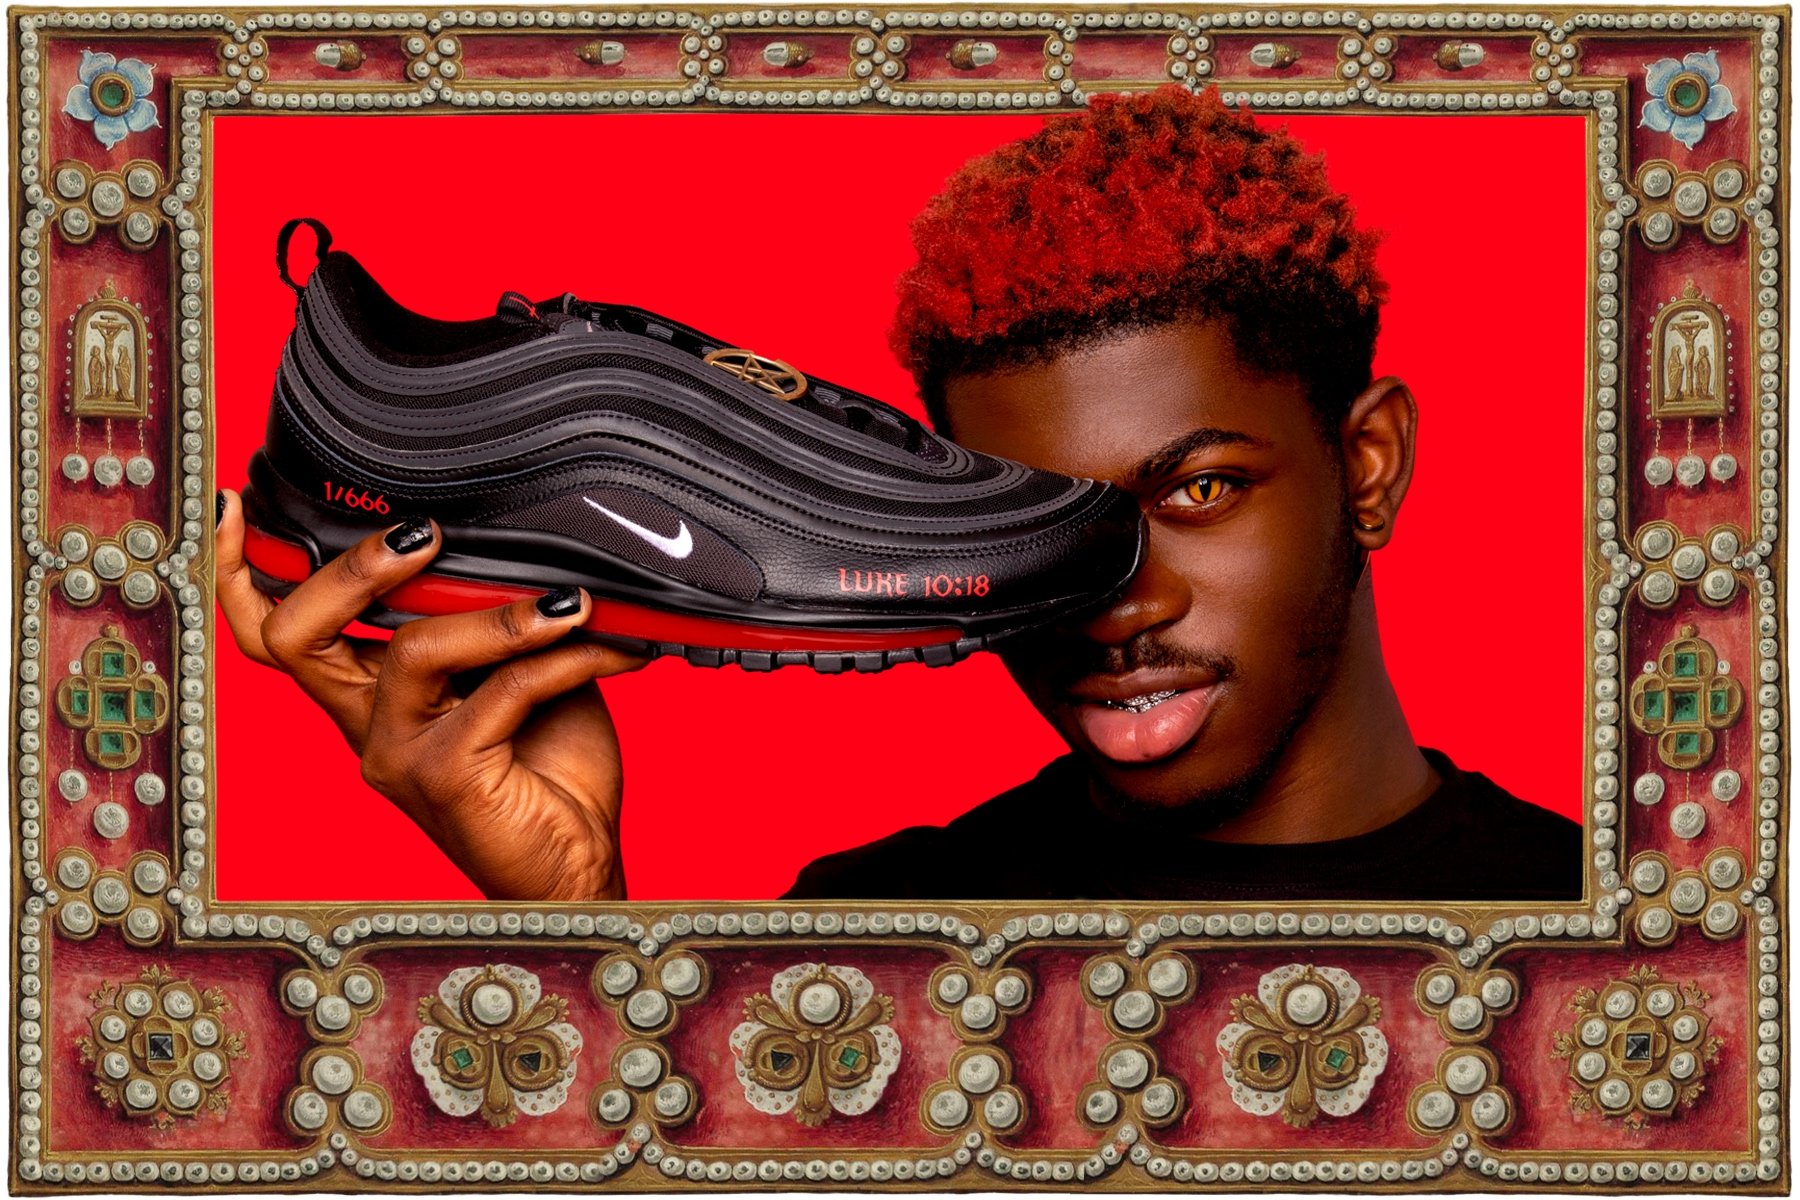 Lil Nas X's "Satan Shoes" With Human Blood Get Ringing Endorsement From "Church of Satan"